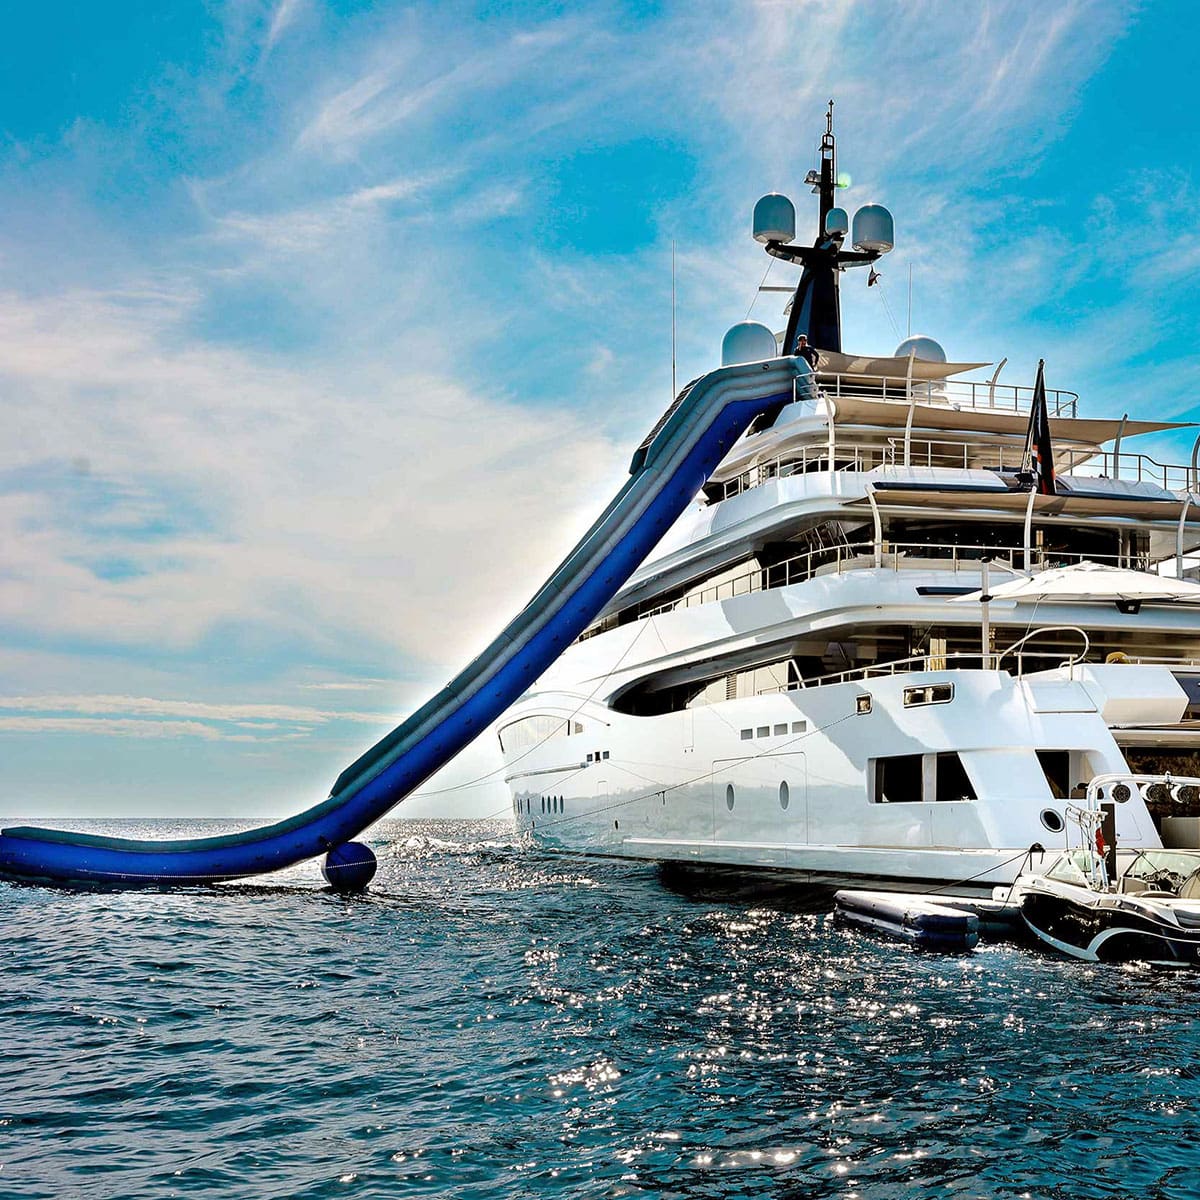 A sytt with superyacht tenders and toys, including a water slide, in the middle of the ocean.